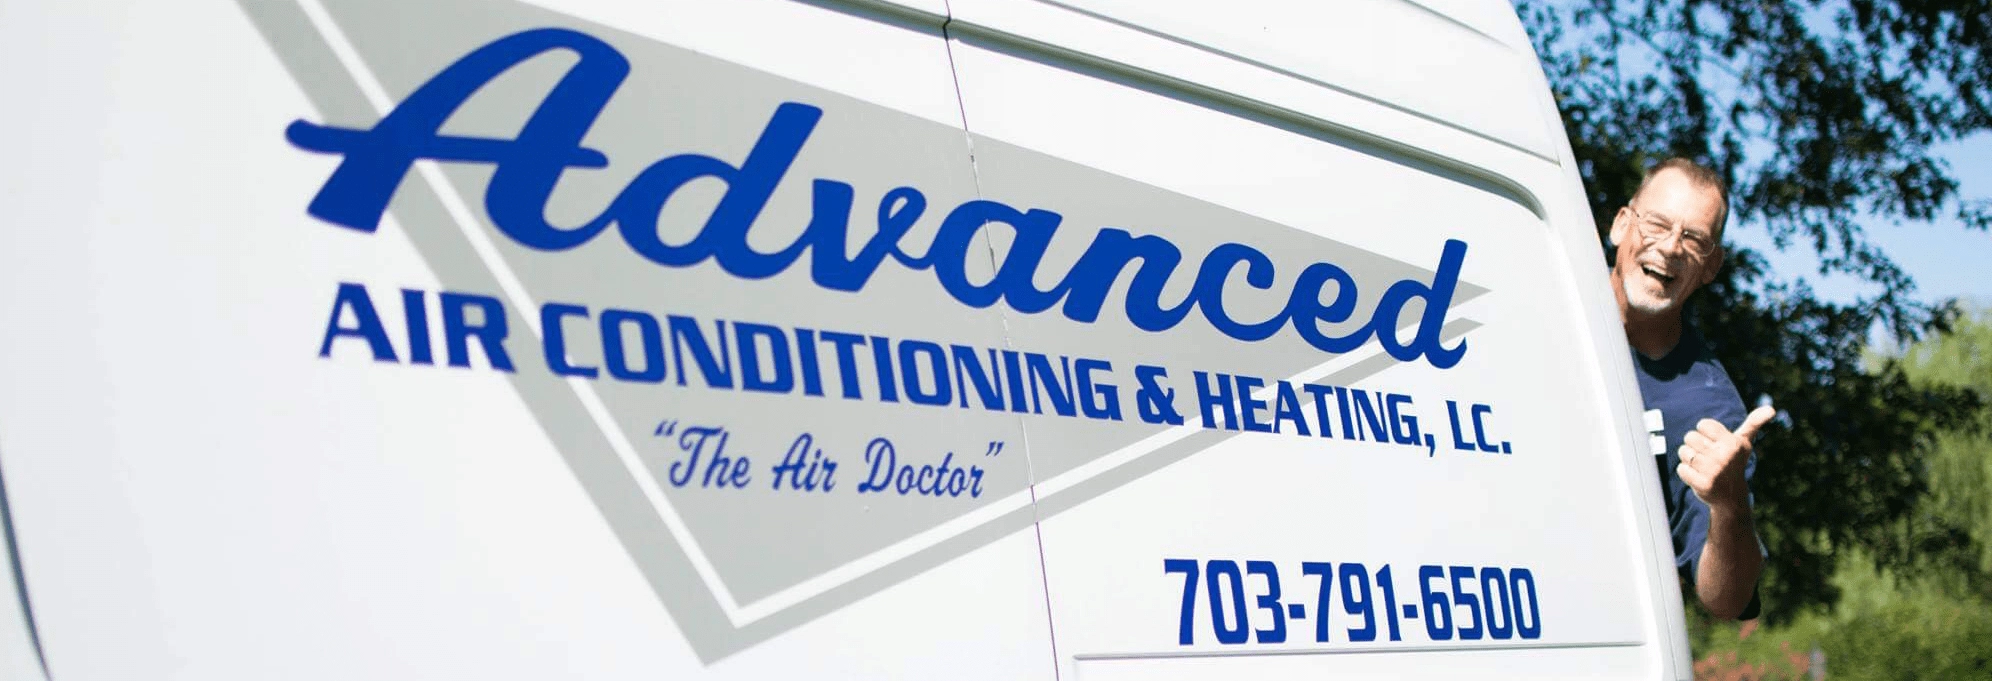 Advanced Air Conditioning and Heating Logo